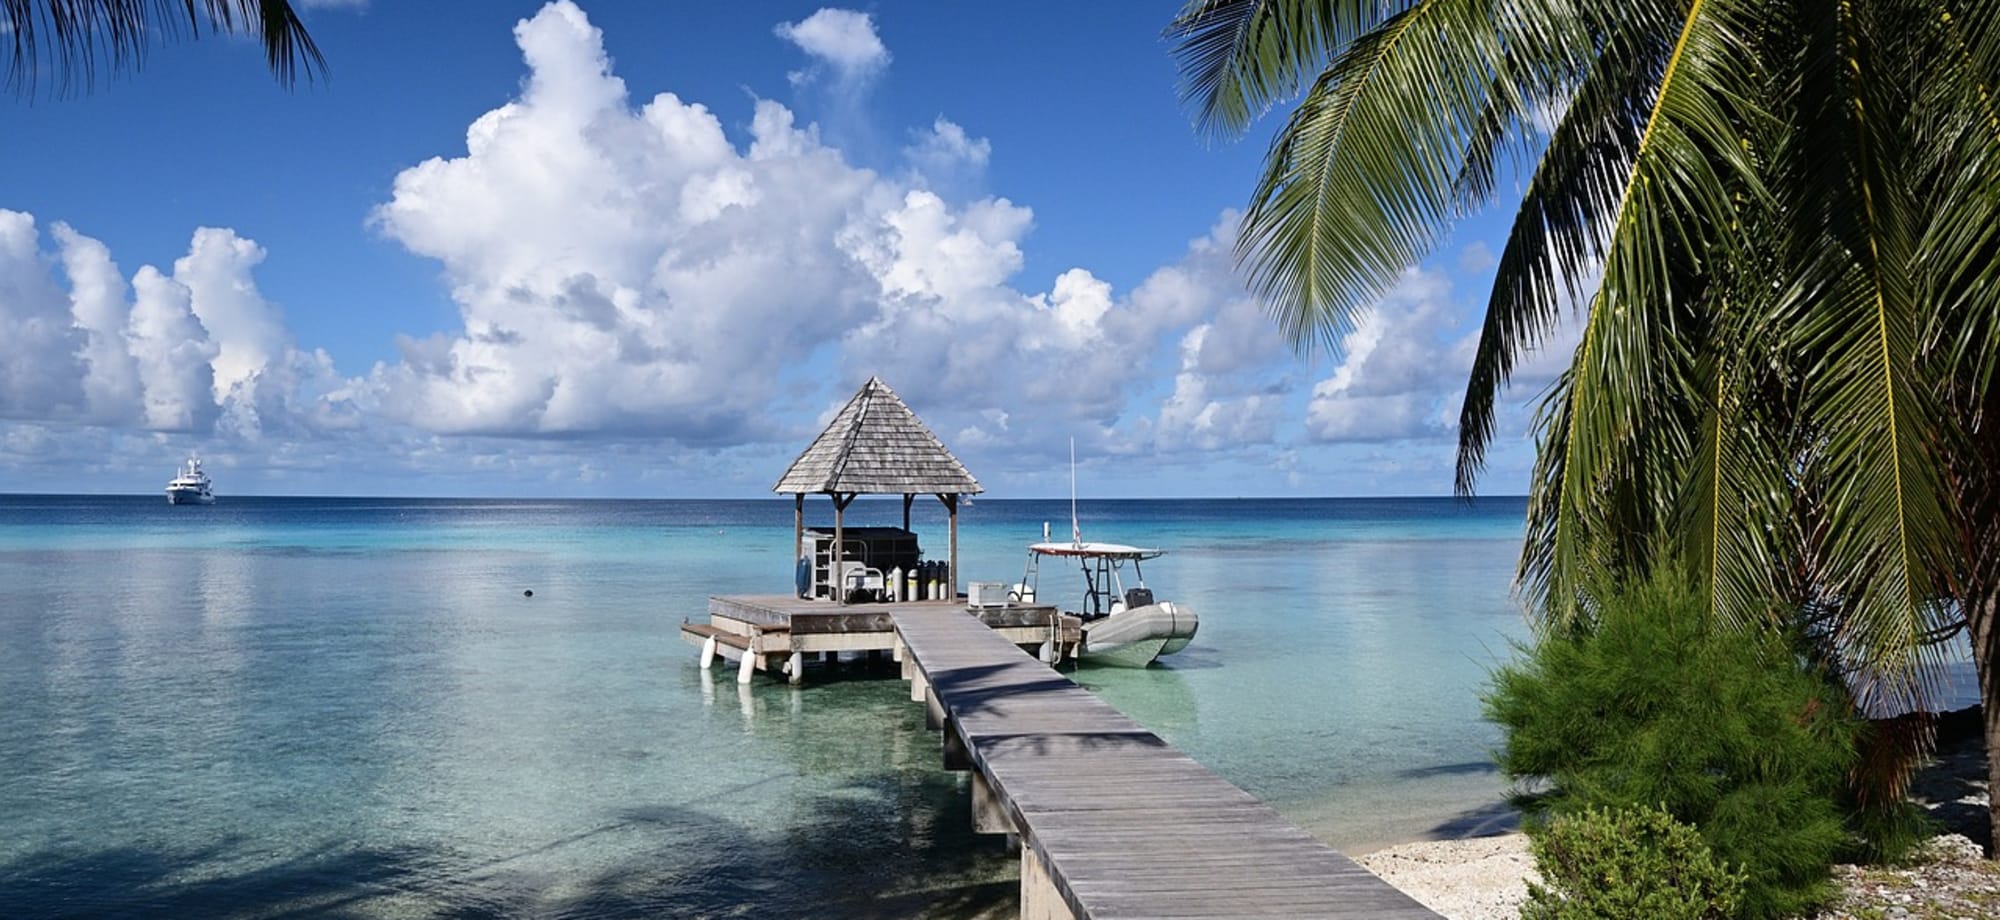 A hut sits above the ocean and is surrounded by palm trees and a beach in Rangiroa.